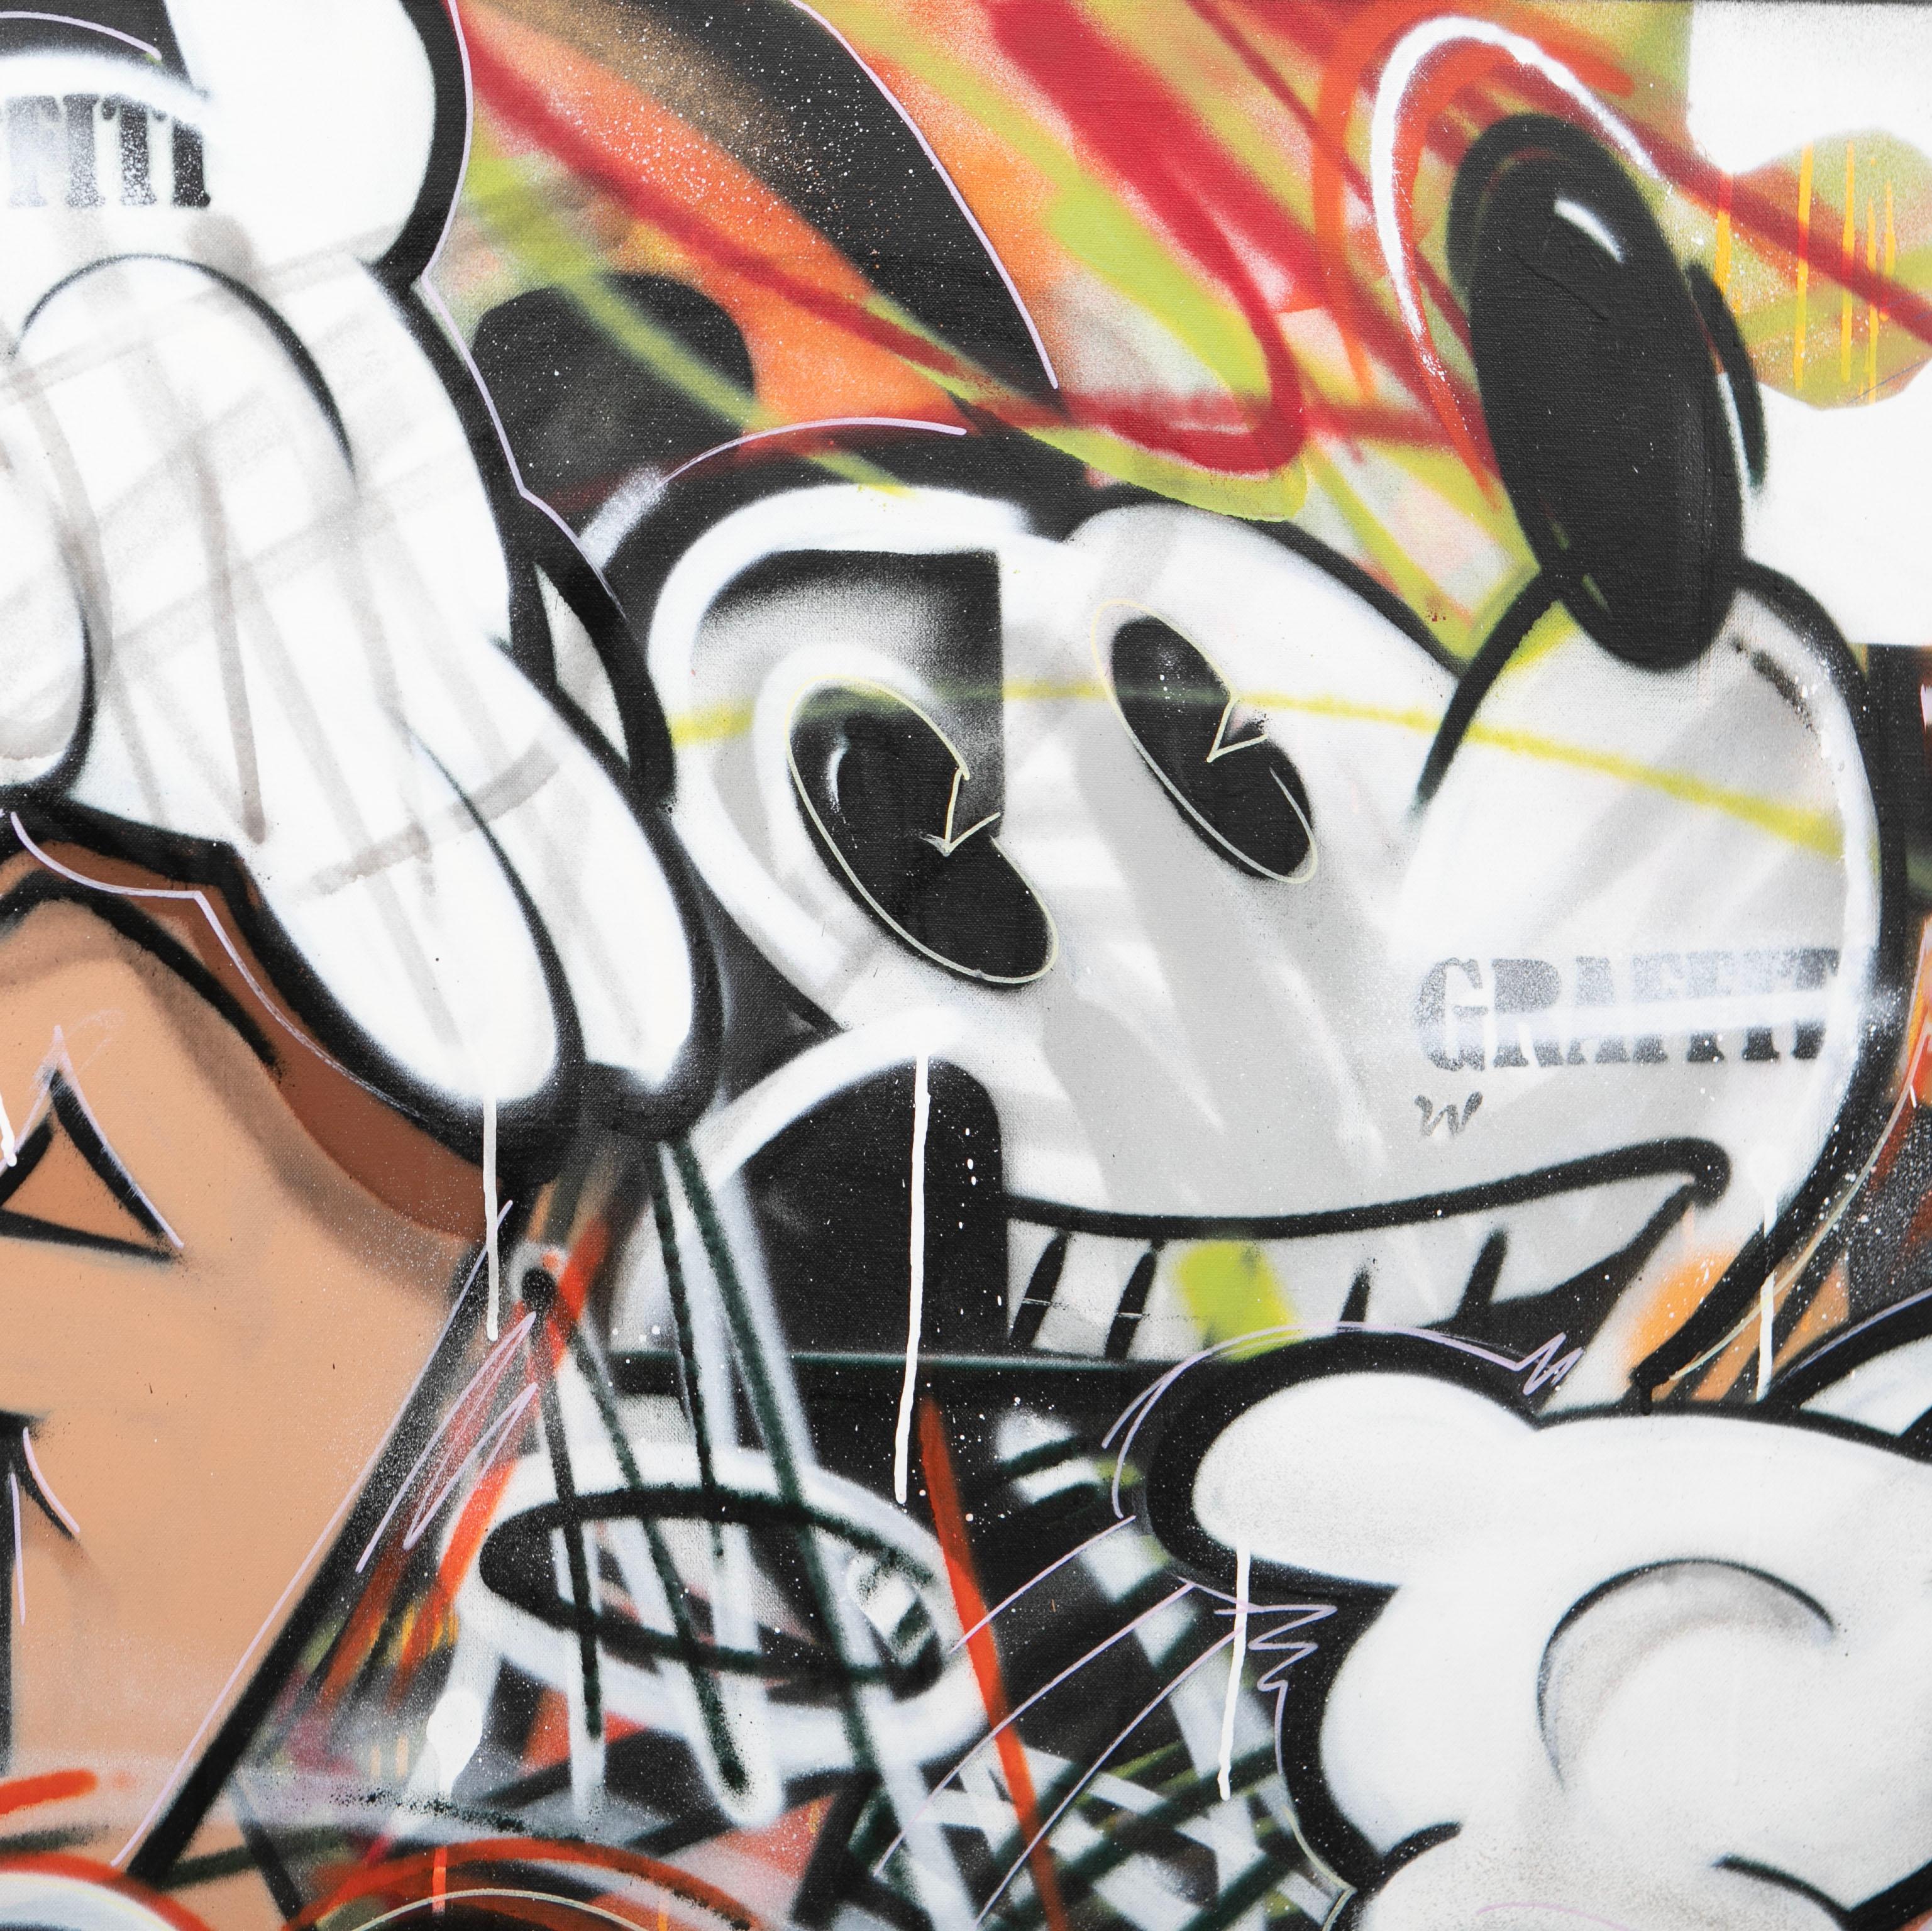 Richard Holmes, b. 1979
Mickey Mouse graffiti art, spray paint and mixed media on canvas. 150 x 95 cm.
Signed on the back.

Richard Holmes is a British graffiti artist, now resident in Thisted, Denmark. Richard Holmes is also known by the name